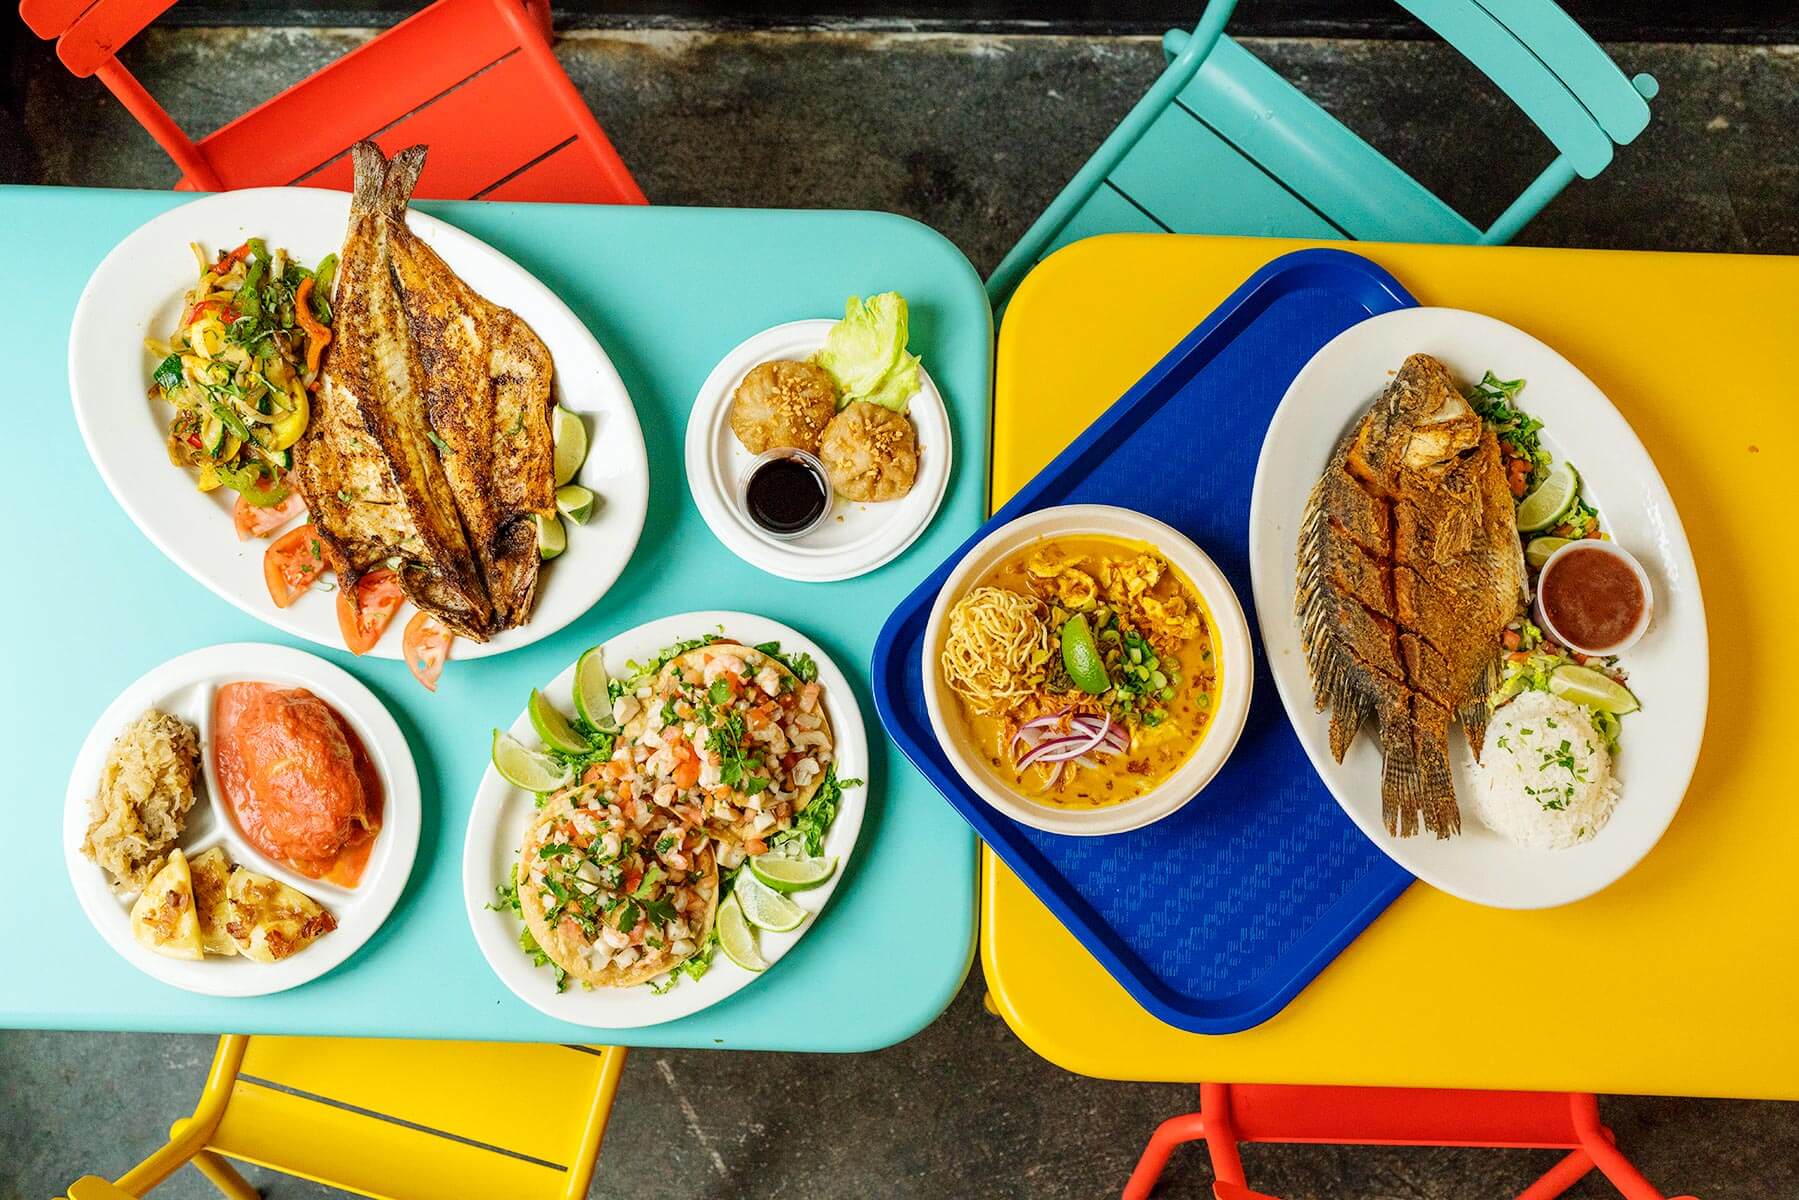 A colorful photo of plates of food including fried fish